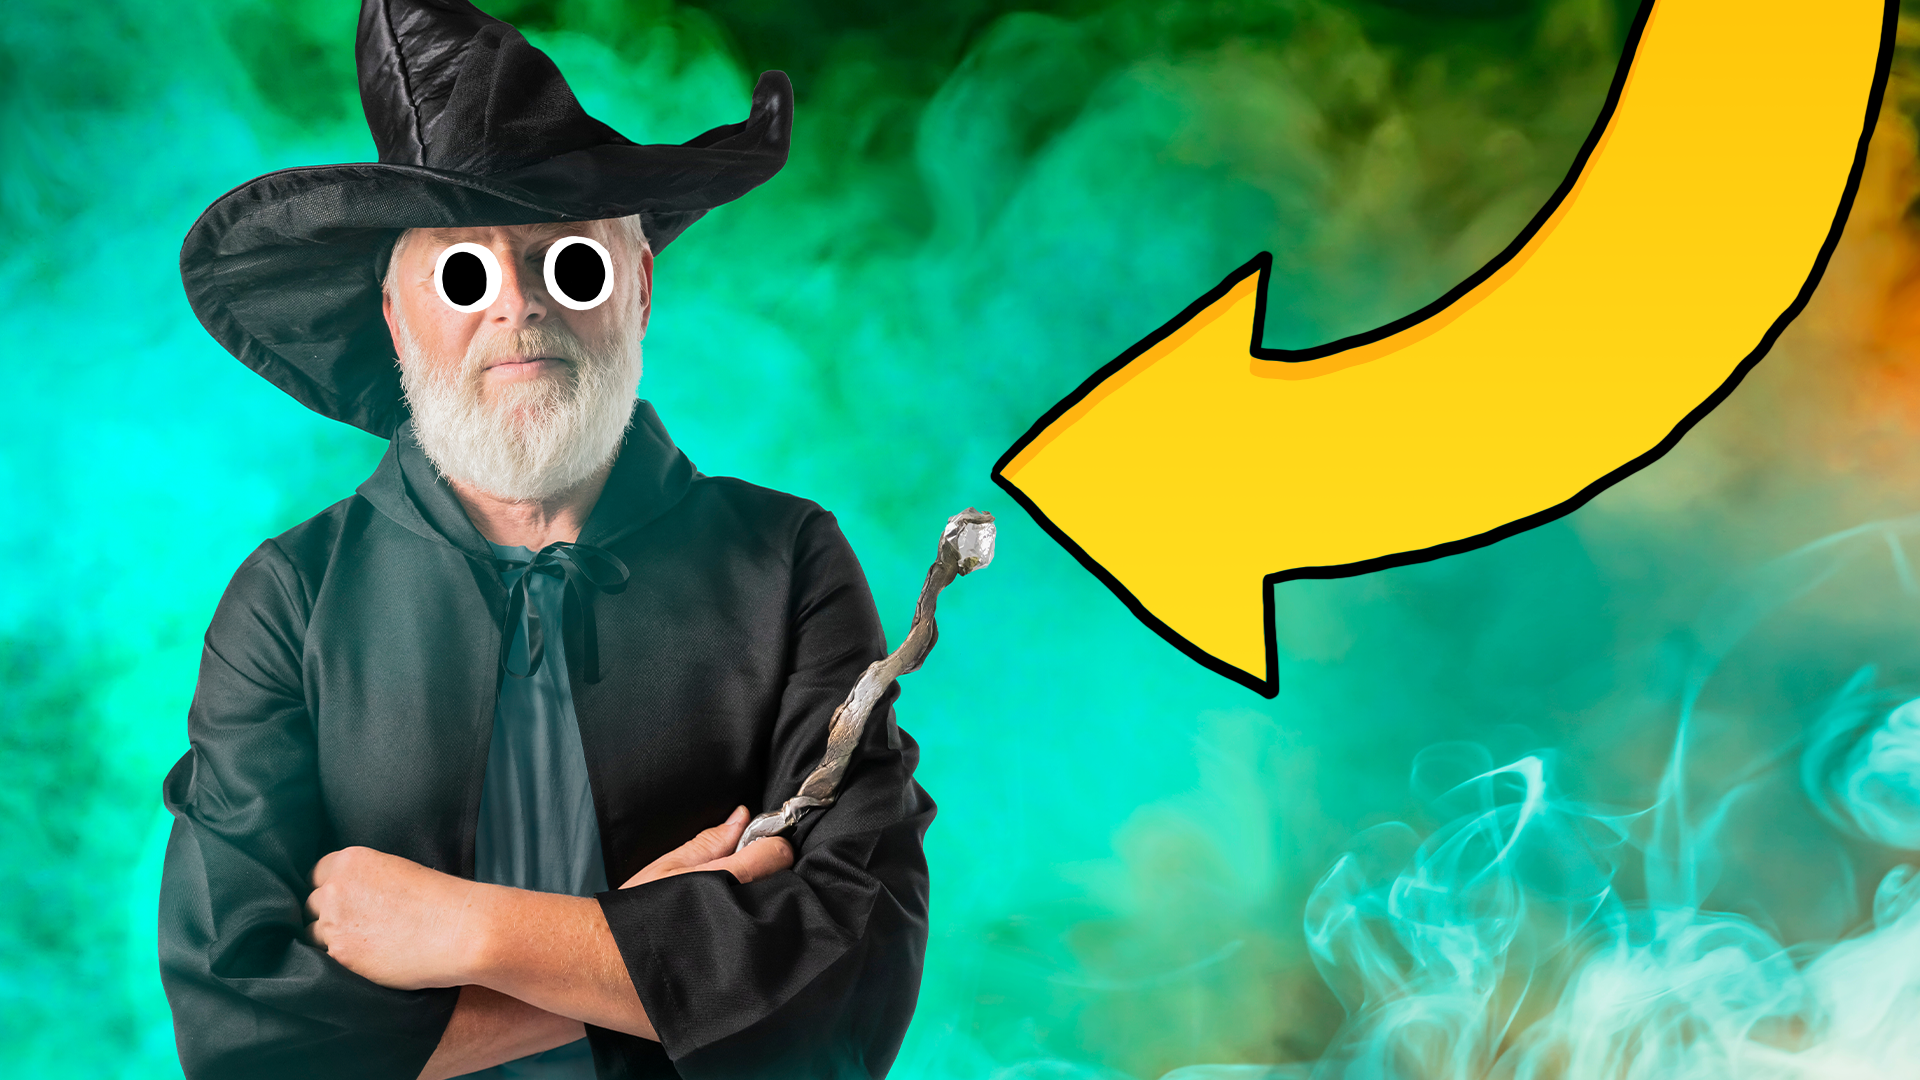 Wizard with arrow pointing to him